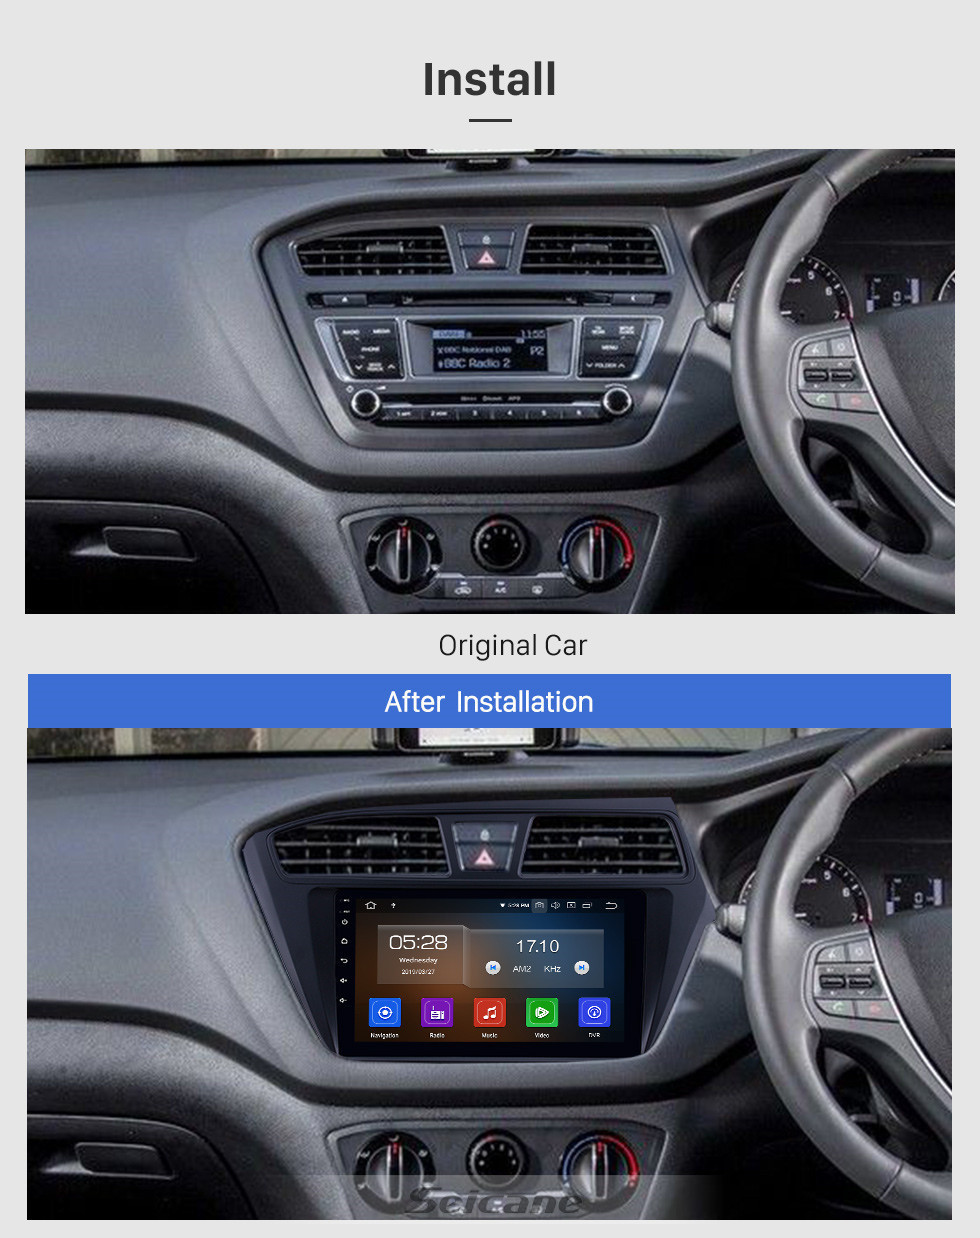 Seicane Hot Selling Android 11.0 9 inch 2014-2017 Hyundai i20 RHD Radio with GPS Navigation Touchscreen Carplay WIFI Bluetooth USB support Mirror Link 1080P